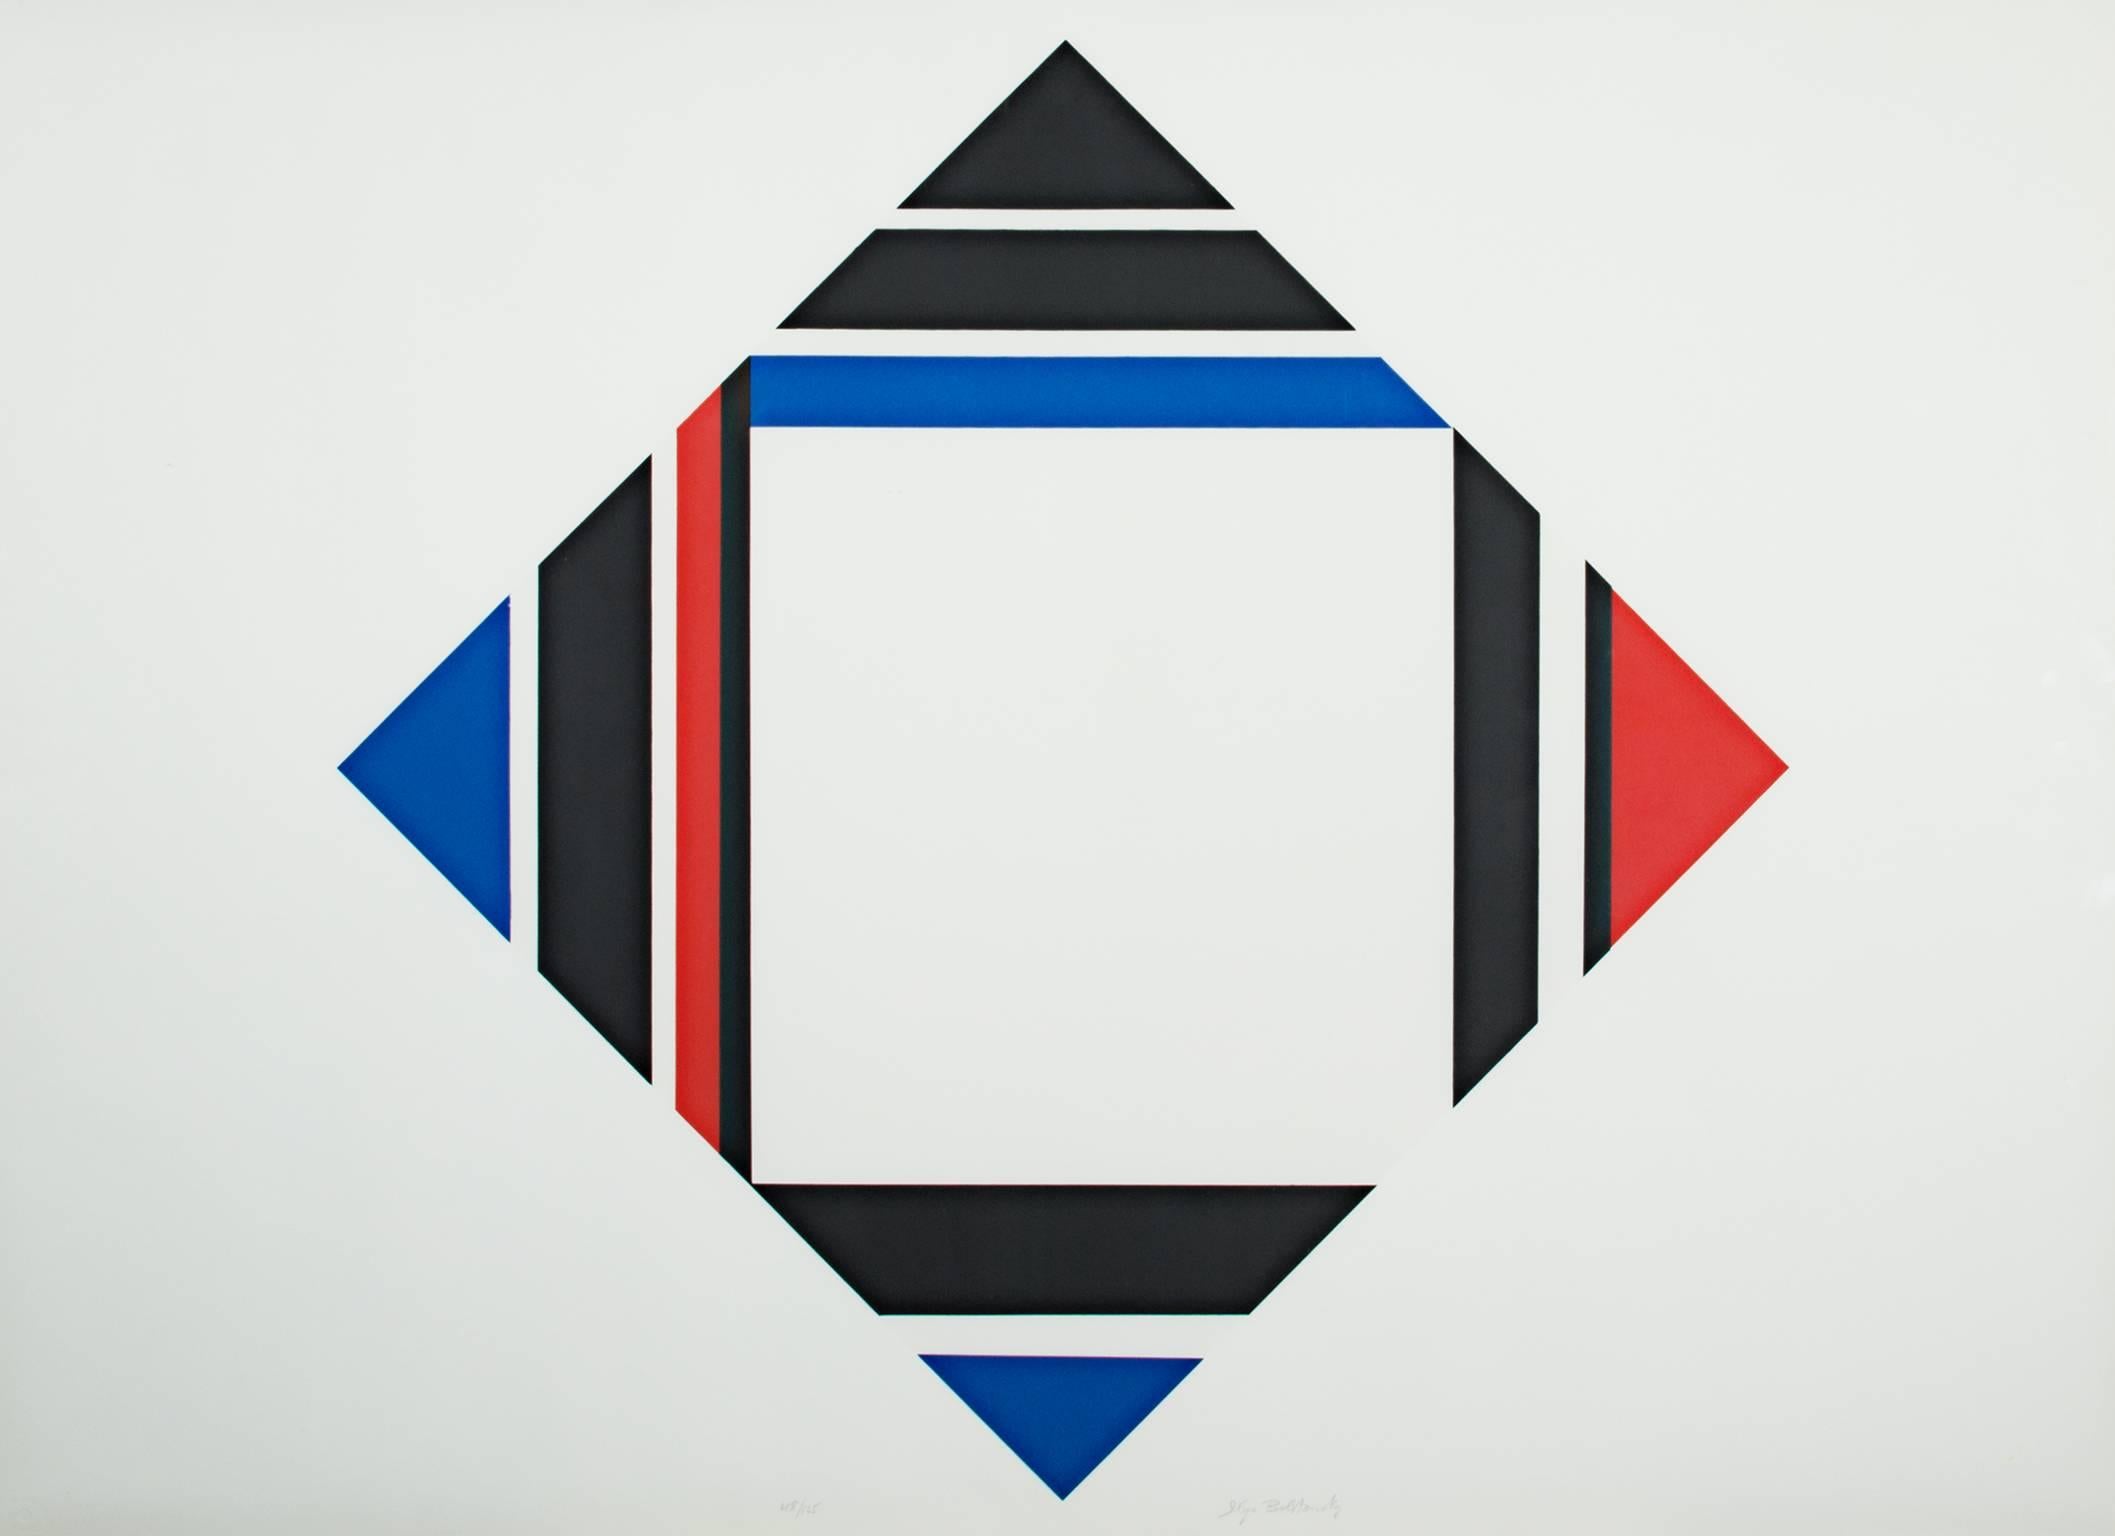 Ilya Bolotowsky's Red/Blue/Black Diamond from around 1970, immediately shows the deep influence of Piet Mondrian's New-Plasticism. Bolotowsky first saw Mondrian's paintings in the 1930s and adopted a Neo-Plastic style in the late 1940s. This